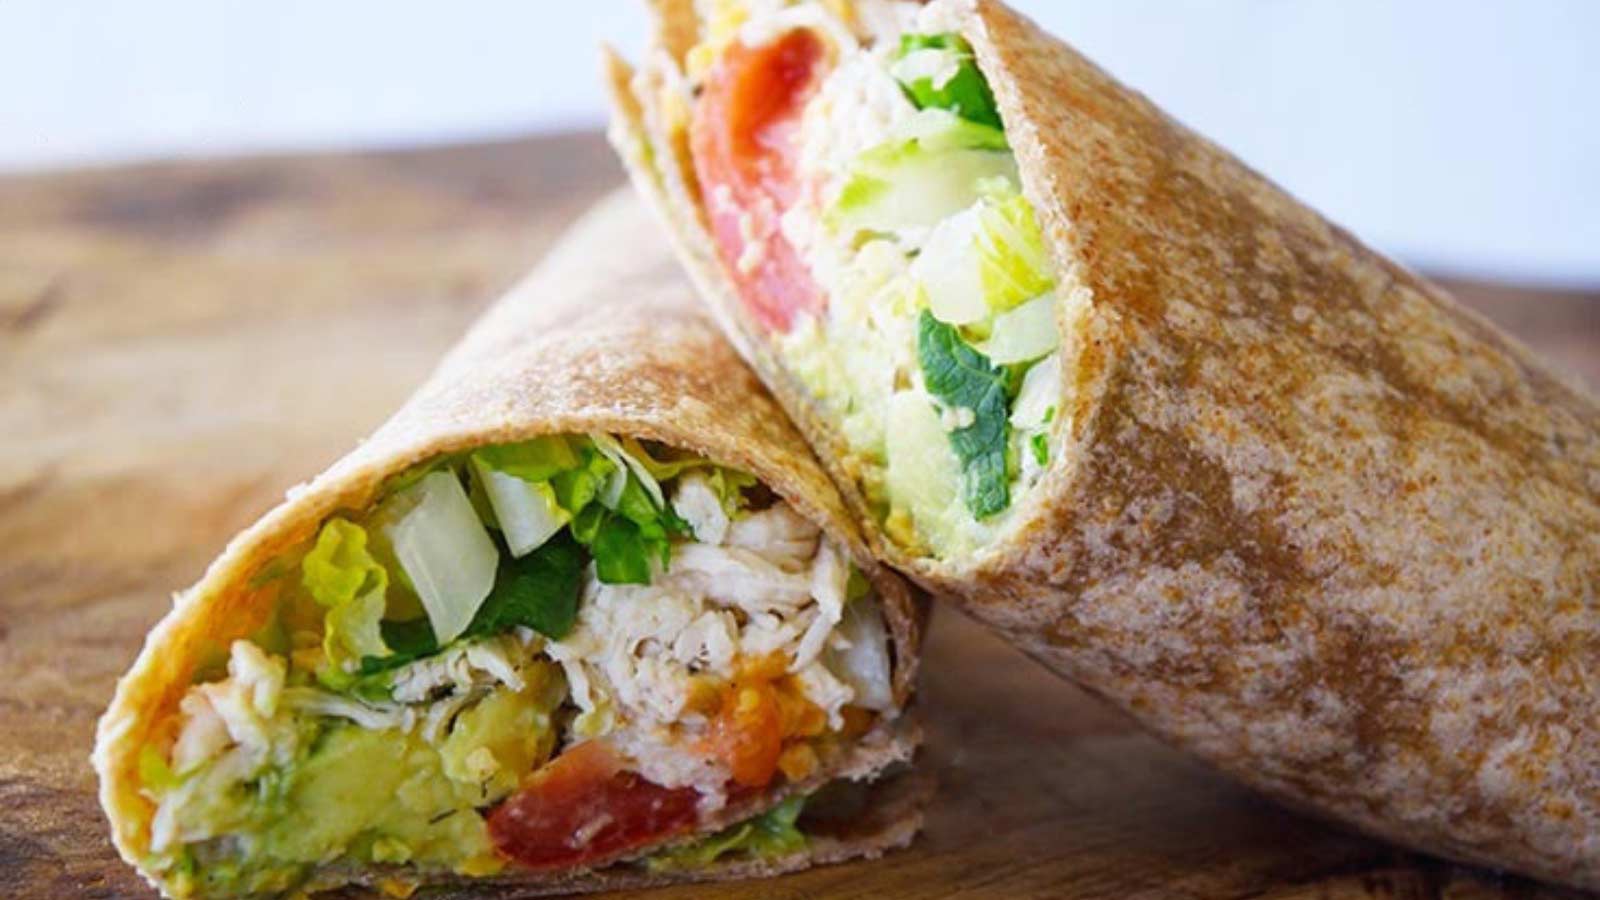 14 School Lunches They Might Actually Eat